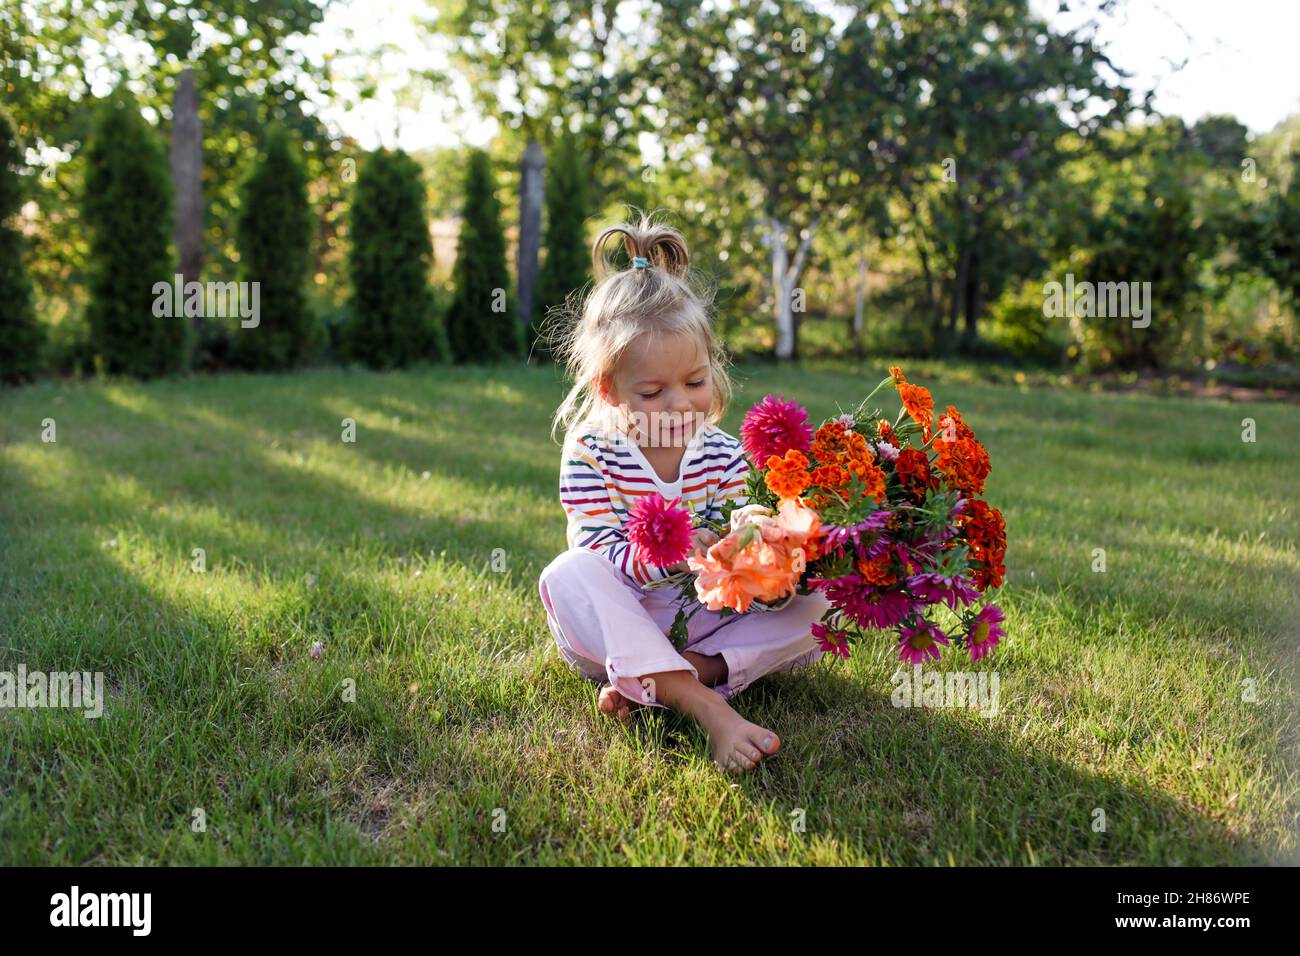 portrait of a beautiful little girl with a bouquet of flowers sitting on a green lawn barefoot. Stock Photo